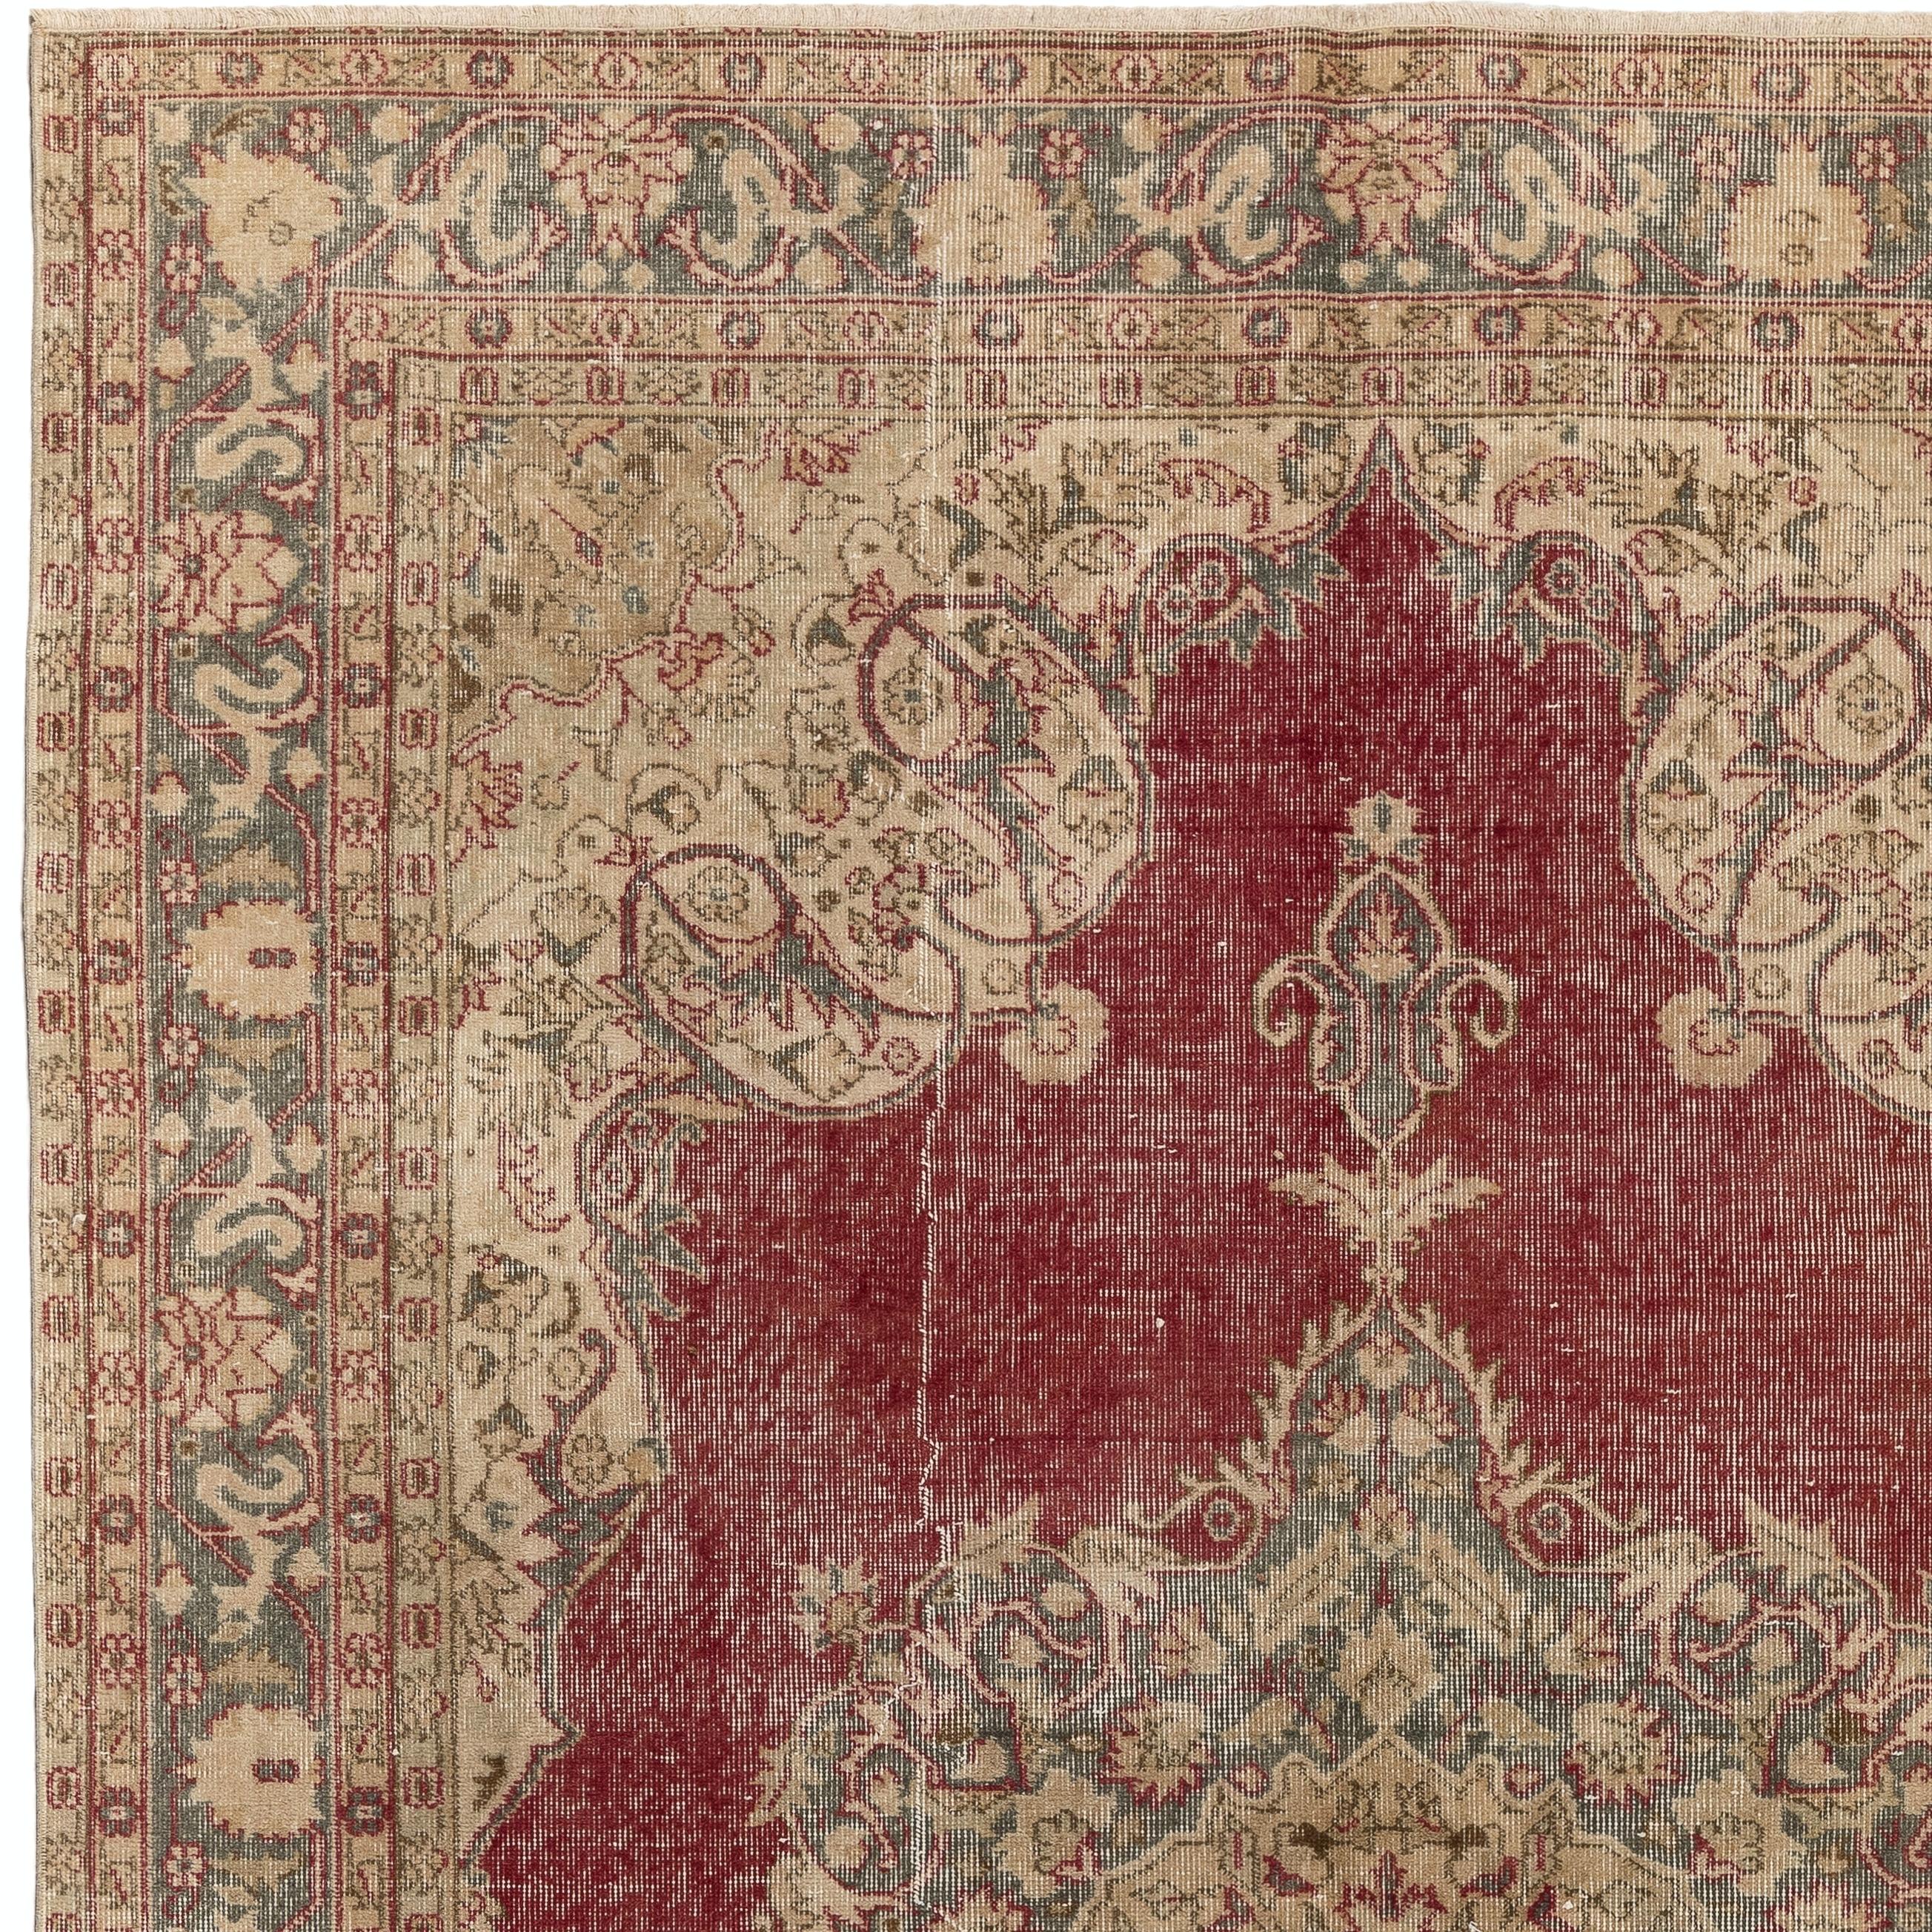 A beautiful hand-knotted Turkish Oushak rug from the 1960s featuring an elegant central medallion on a burgundy red field as well as lush arabesque corner pieces and borders in beige and greenish gray, decorated with palmettes and scrolling leafy